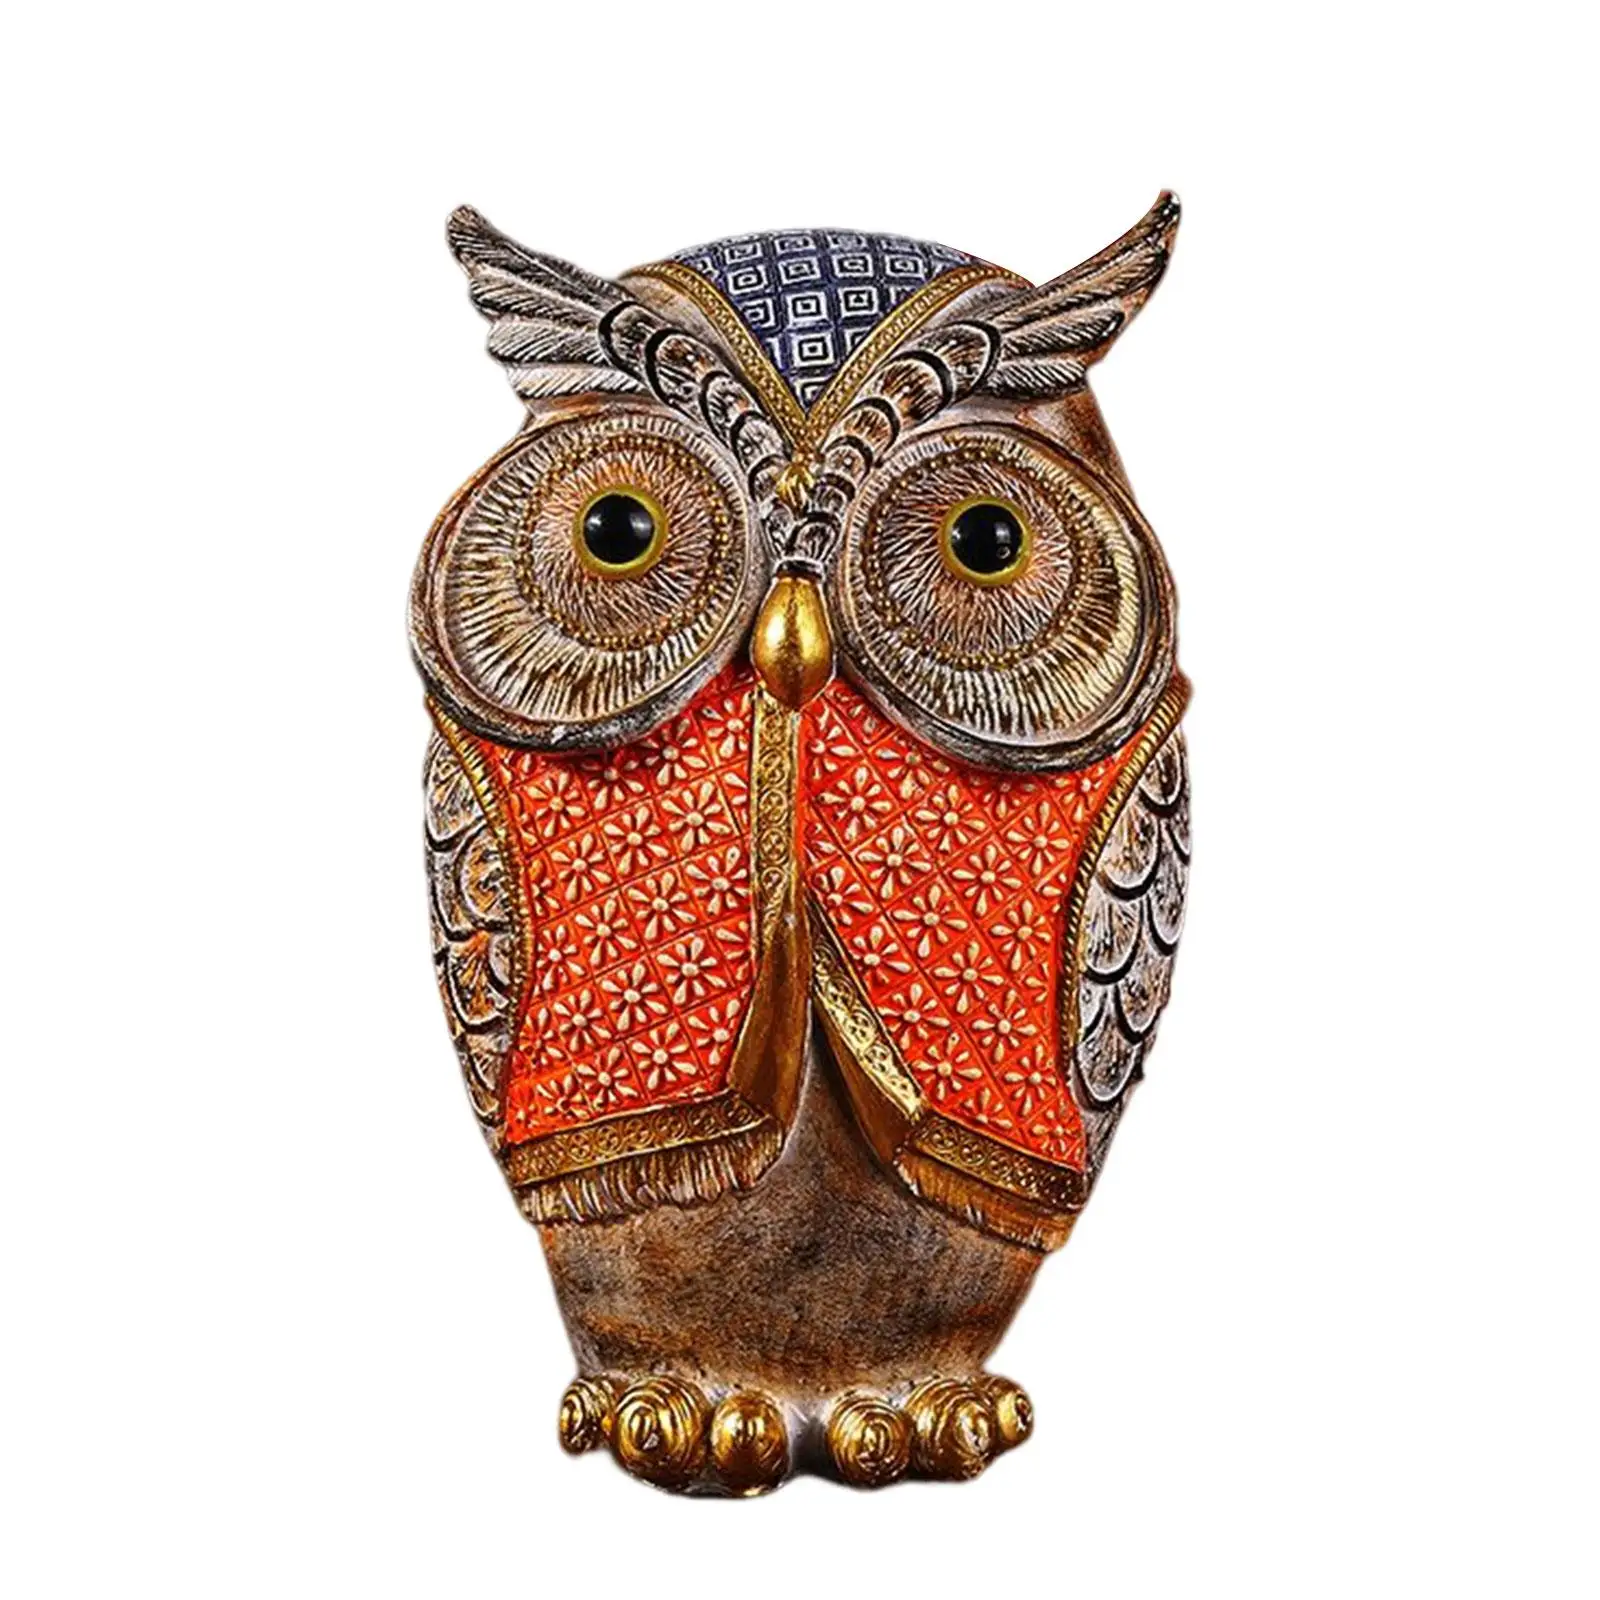 Nordic Owl Figurines Art Ornament Gifts Resin Crafts Realistic Decor Animal Statue for Home Garden Bathroom Living Room Shelf